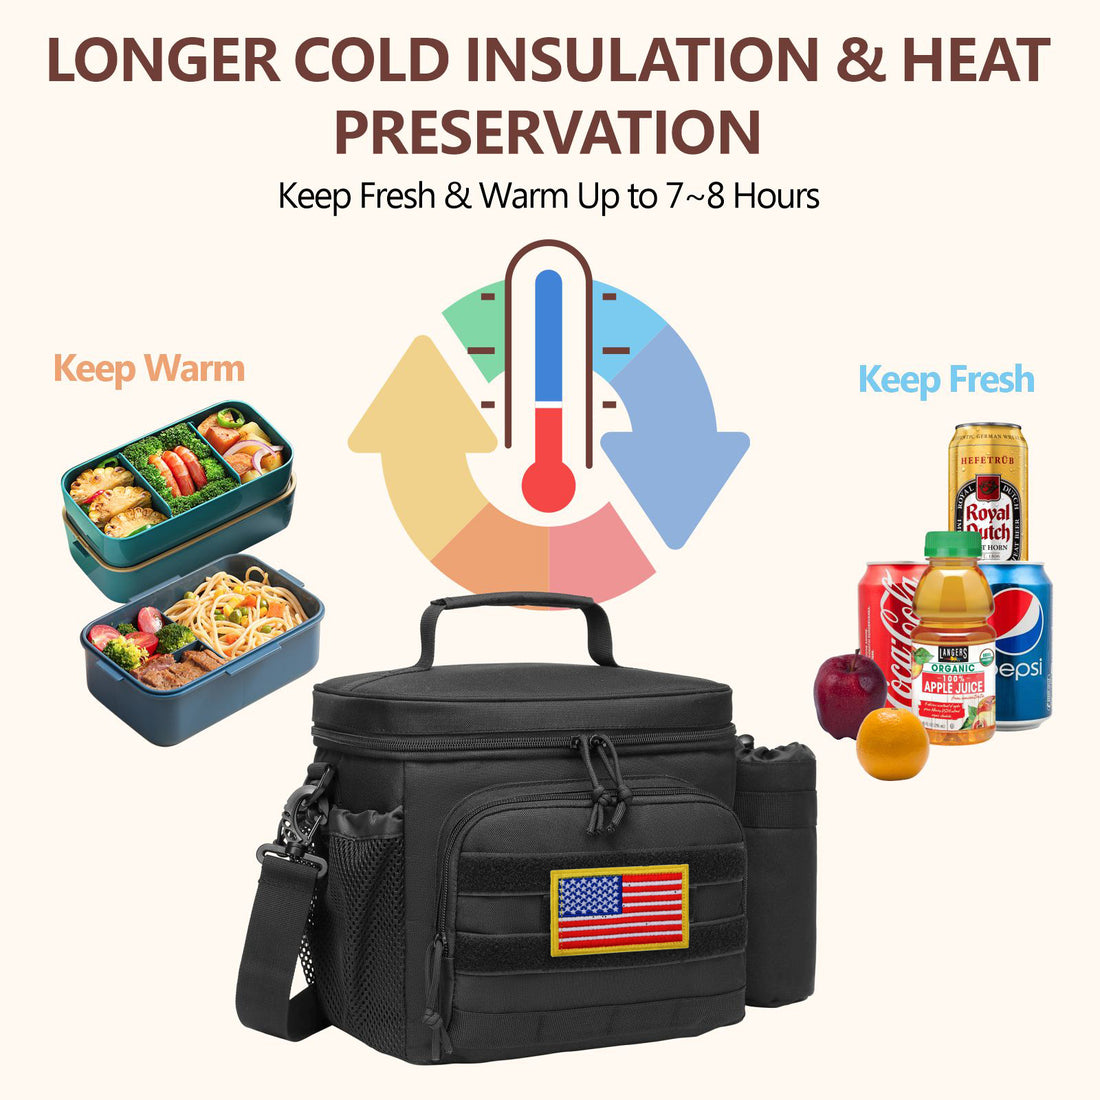 Is insulated lunch box good for health?